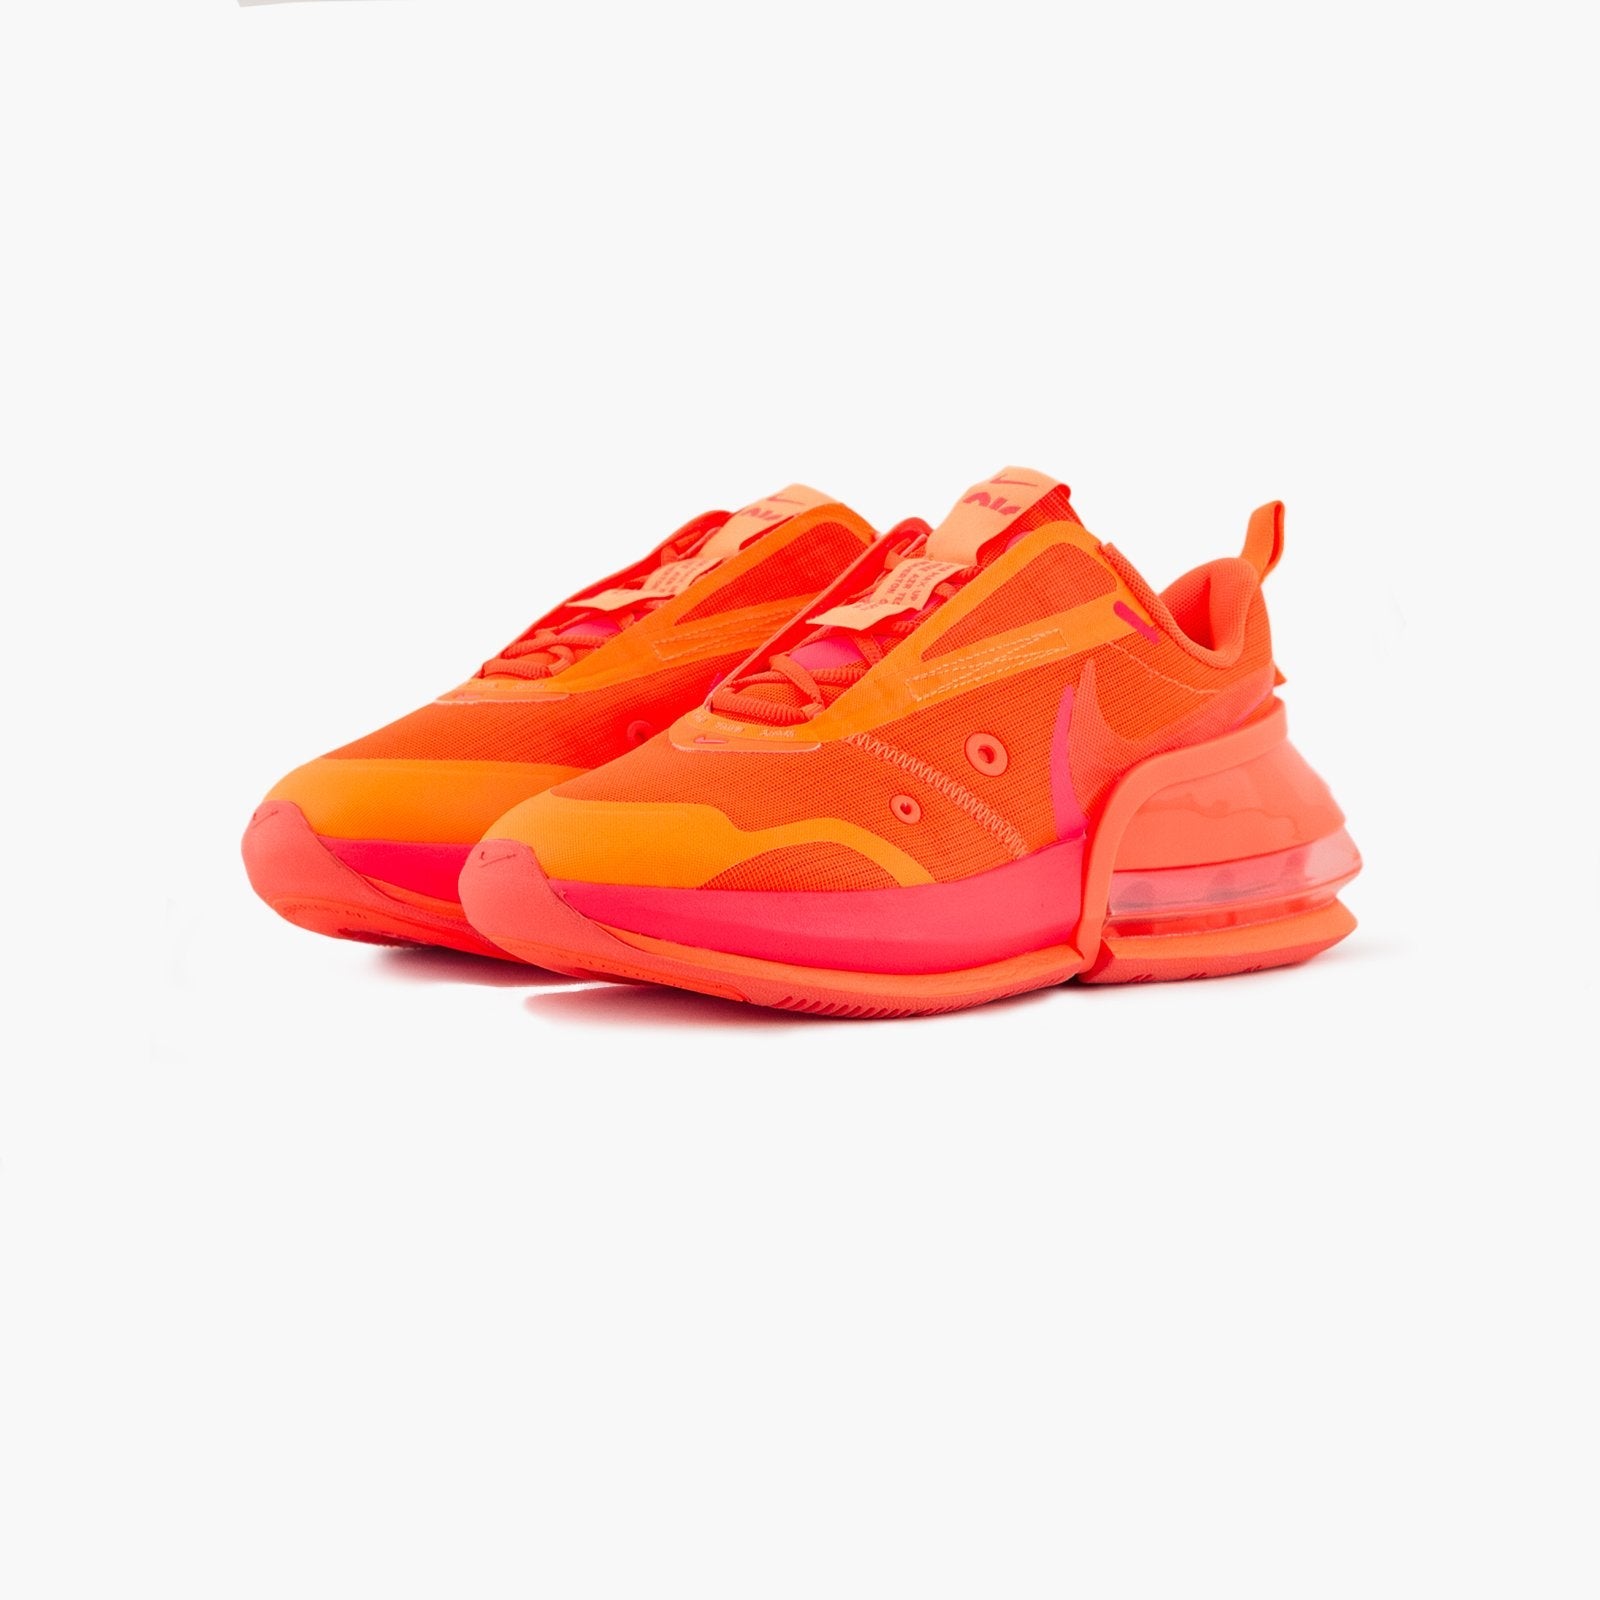 Nike Air Max UP NRG Women’s-CK4124-800
-Orange-11 us-SUEDE Store